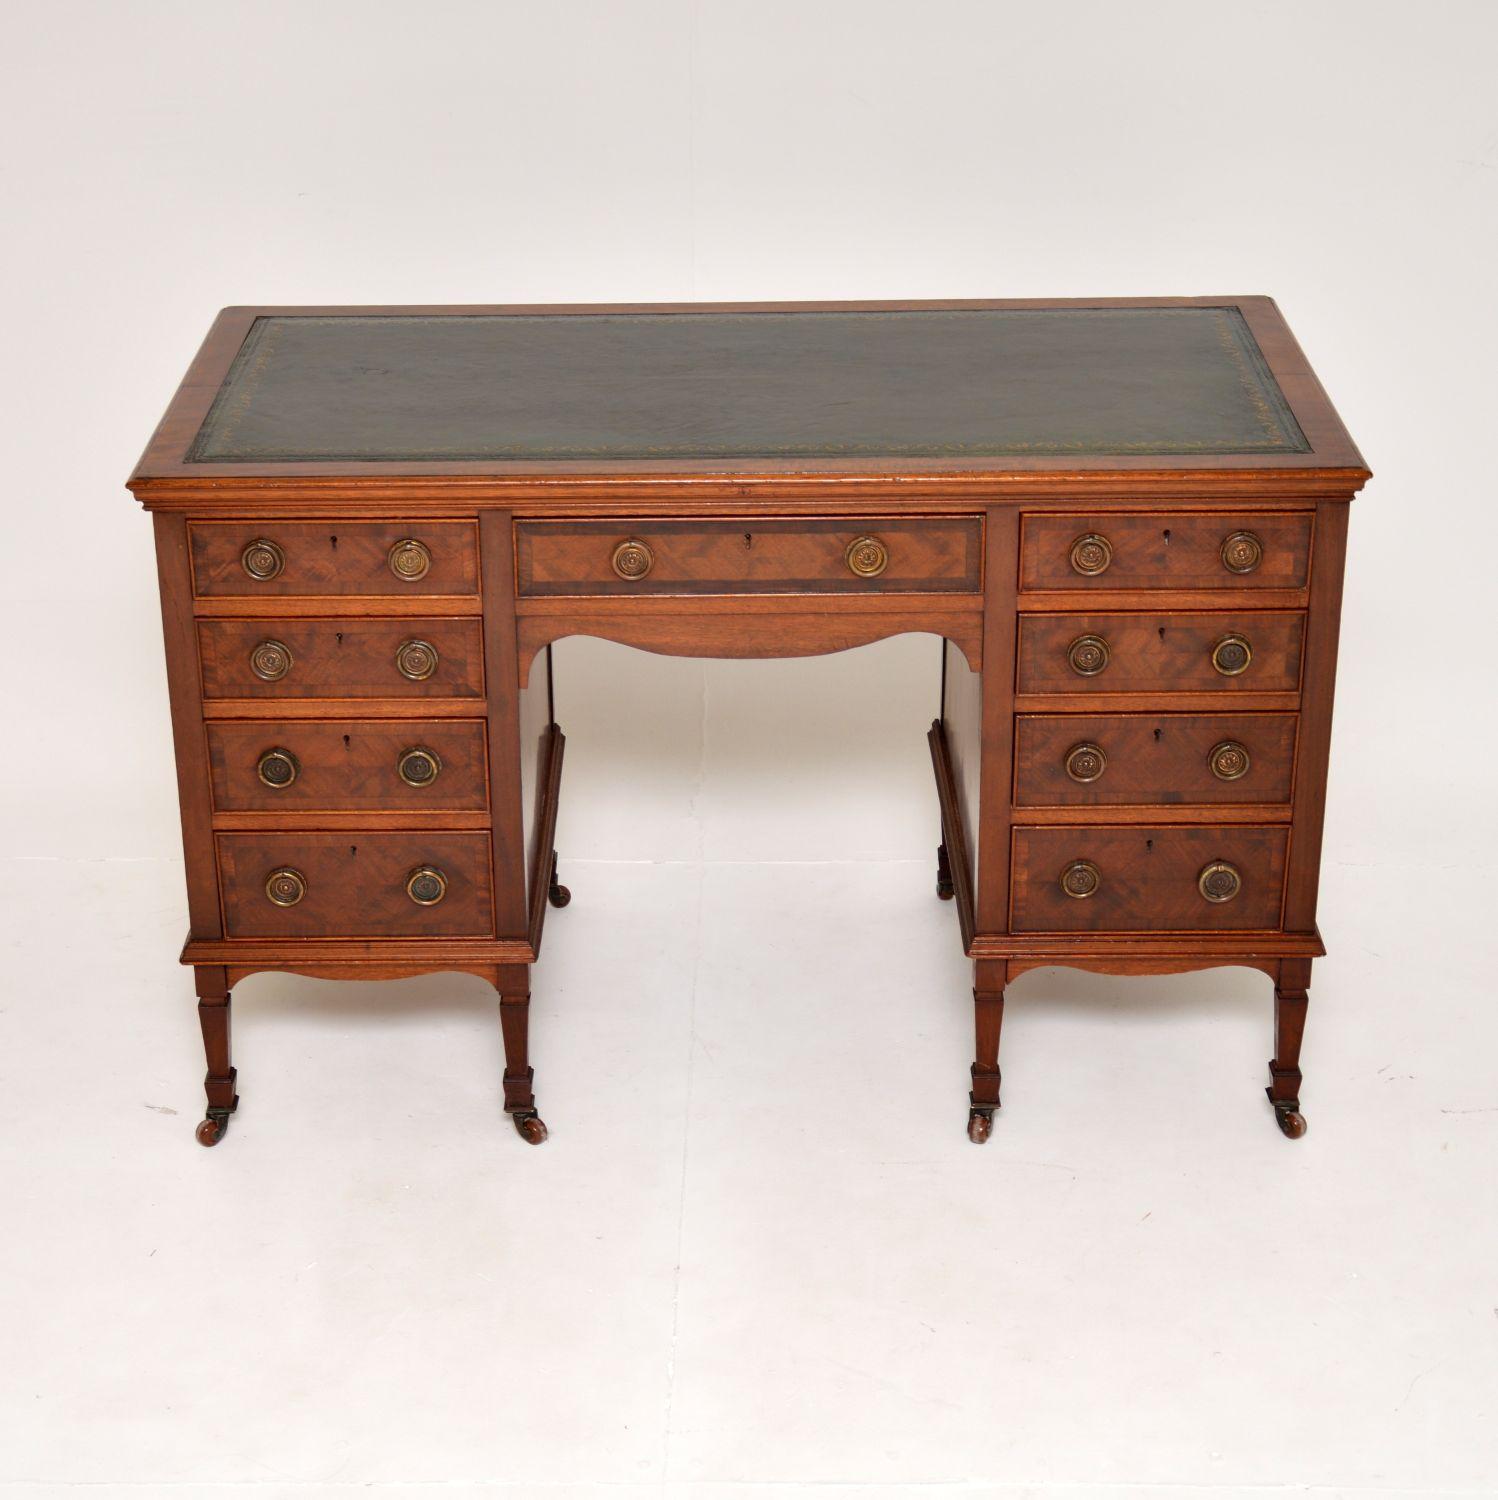 A fantastic original antique Victorian leather top desk. This was made in England, it dates from around 1880-1900.

The quality is amazing, this is very sturdy and well built. There is lots of storage space inside the nine generous drawers. The